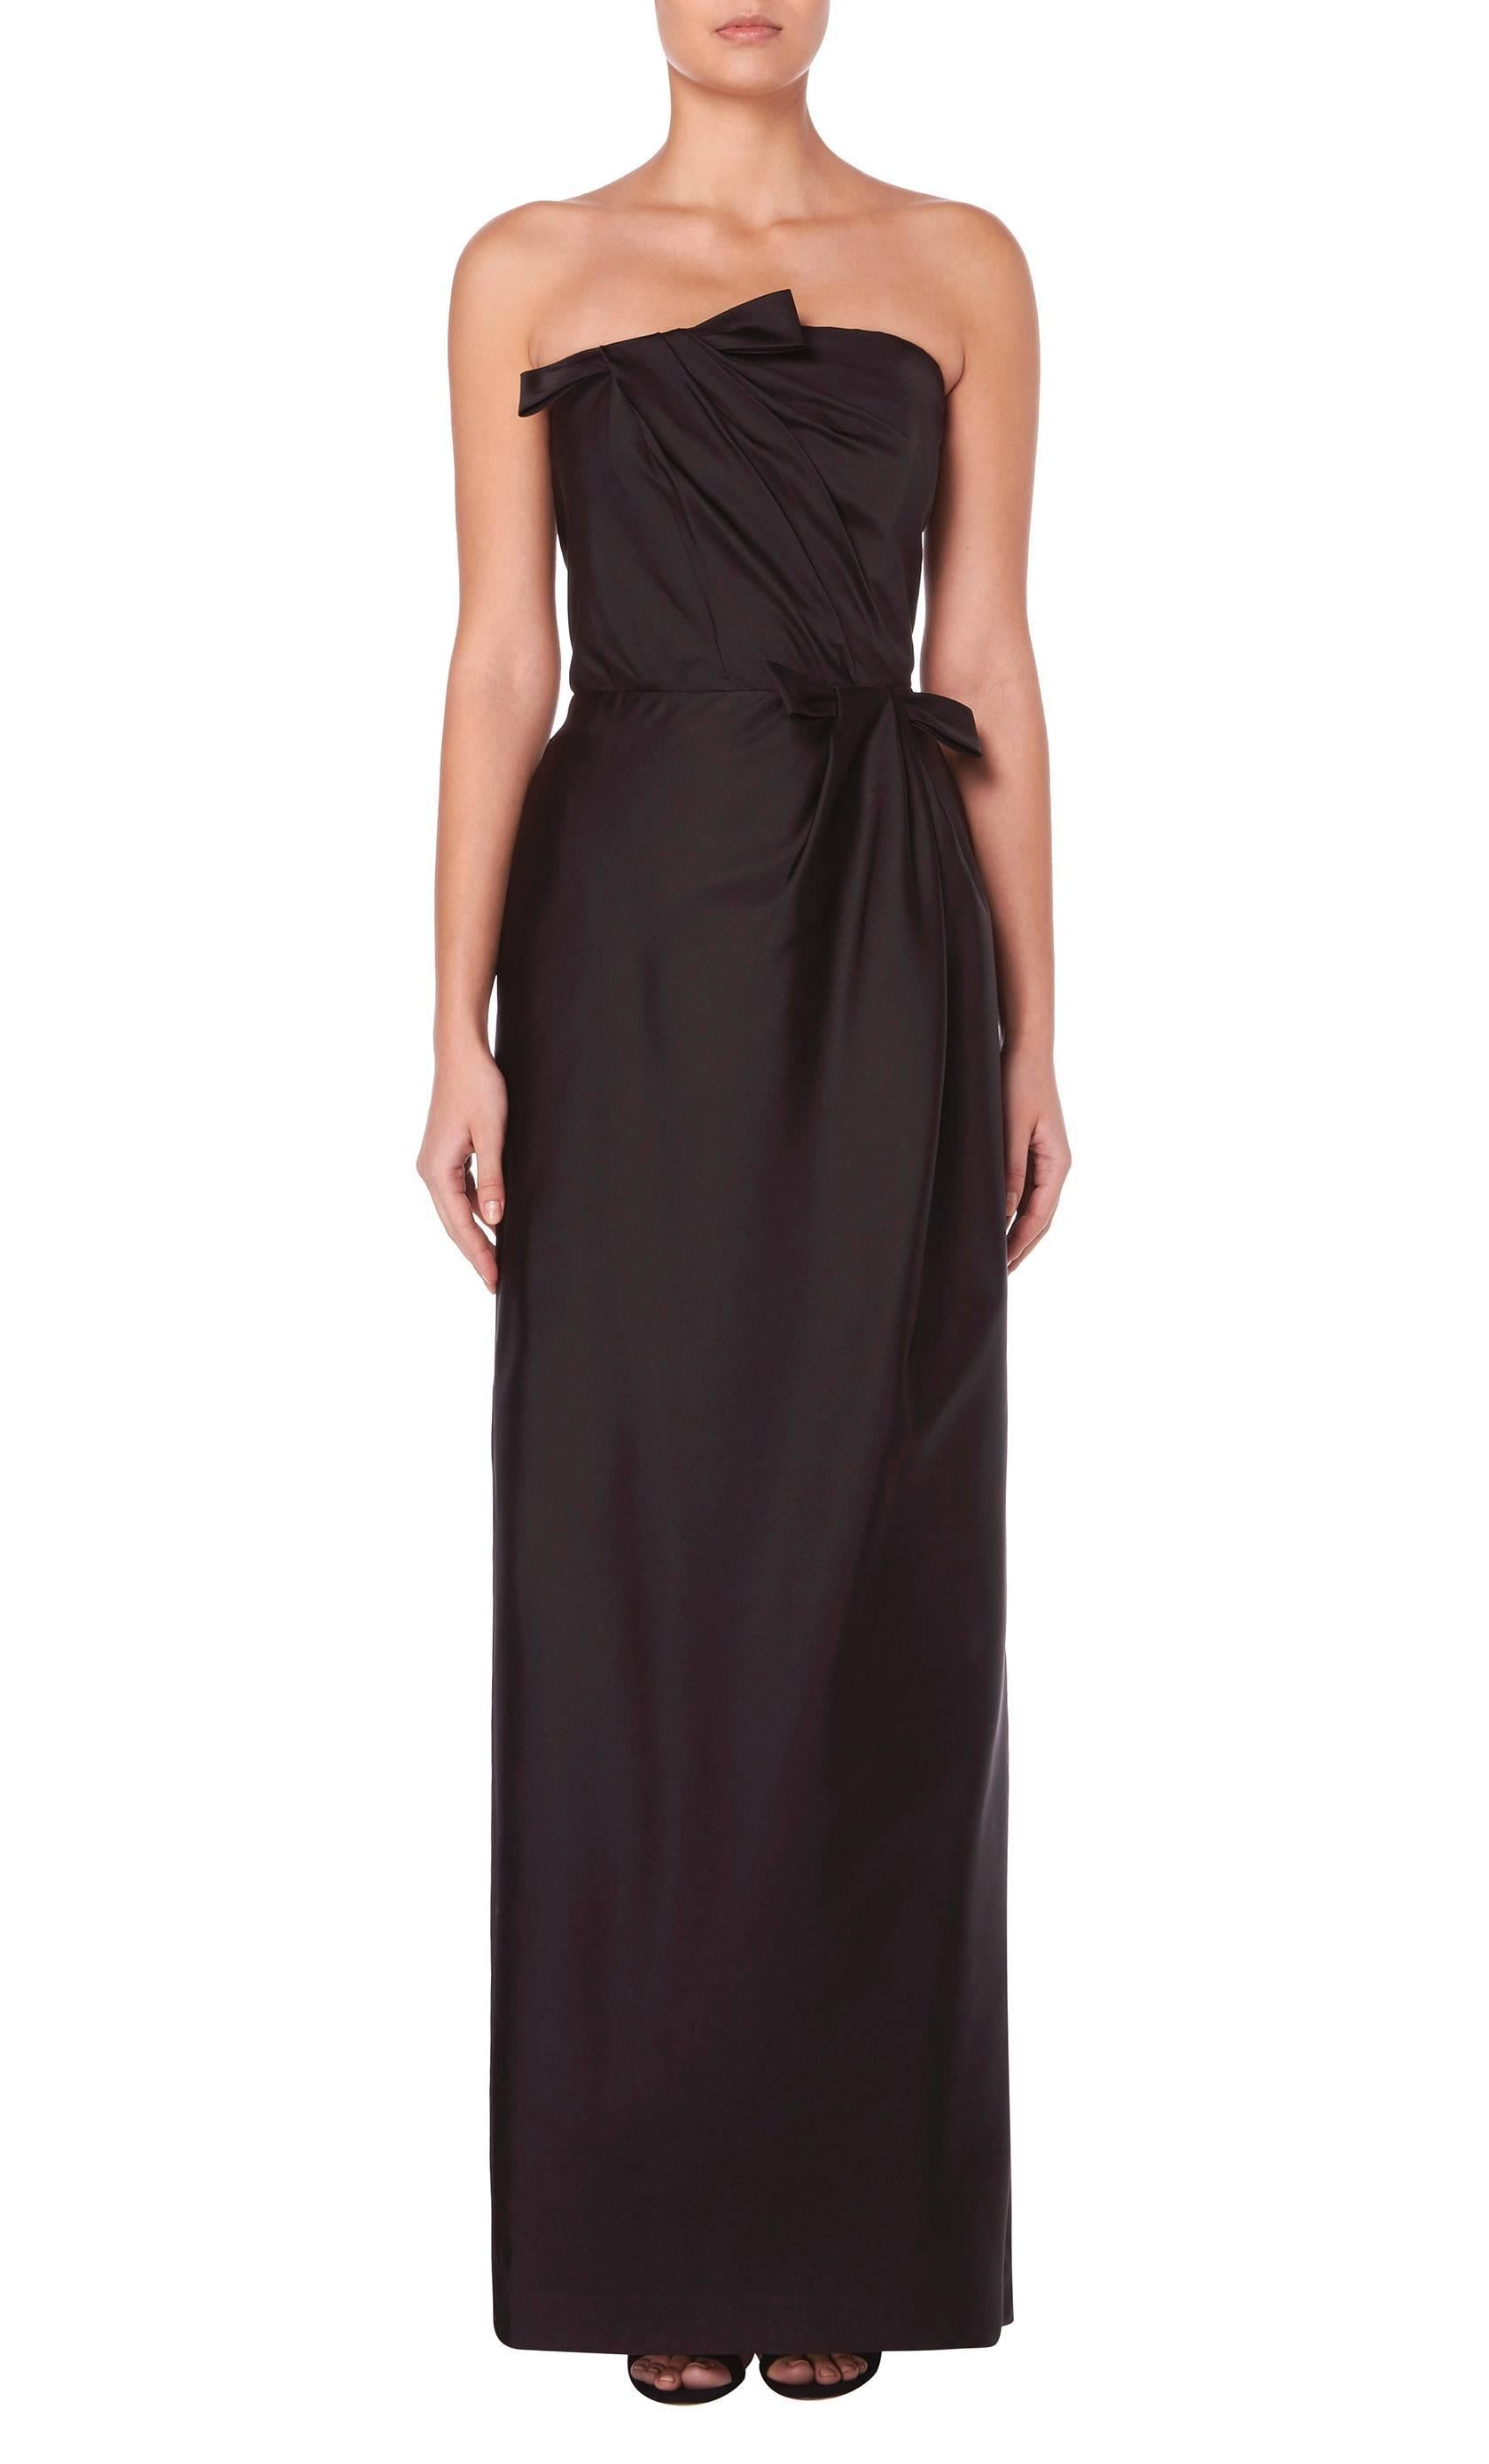 Effortlessly elegant, this Bill Blass strapless gown is ideal for red carpet events. Constructed in black silk taffeta, the gown features artful asymmetric gathering on the bodice, and skirt finished with a bow details at the bust and waist. The